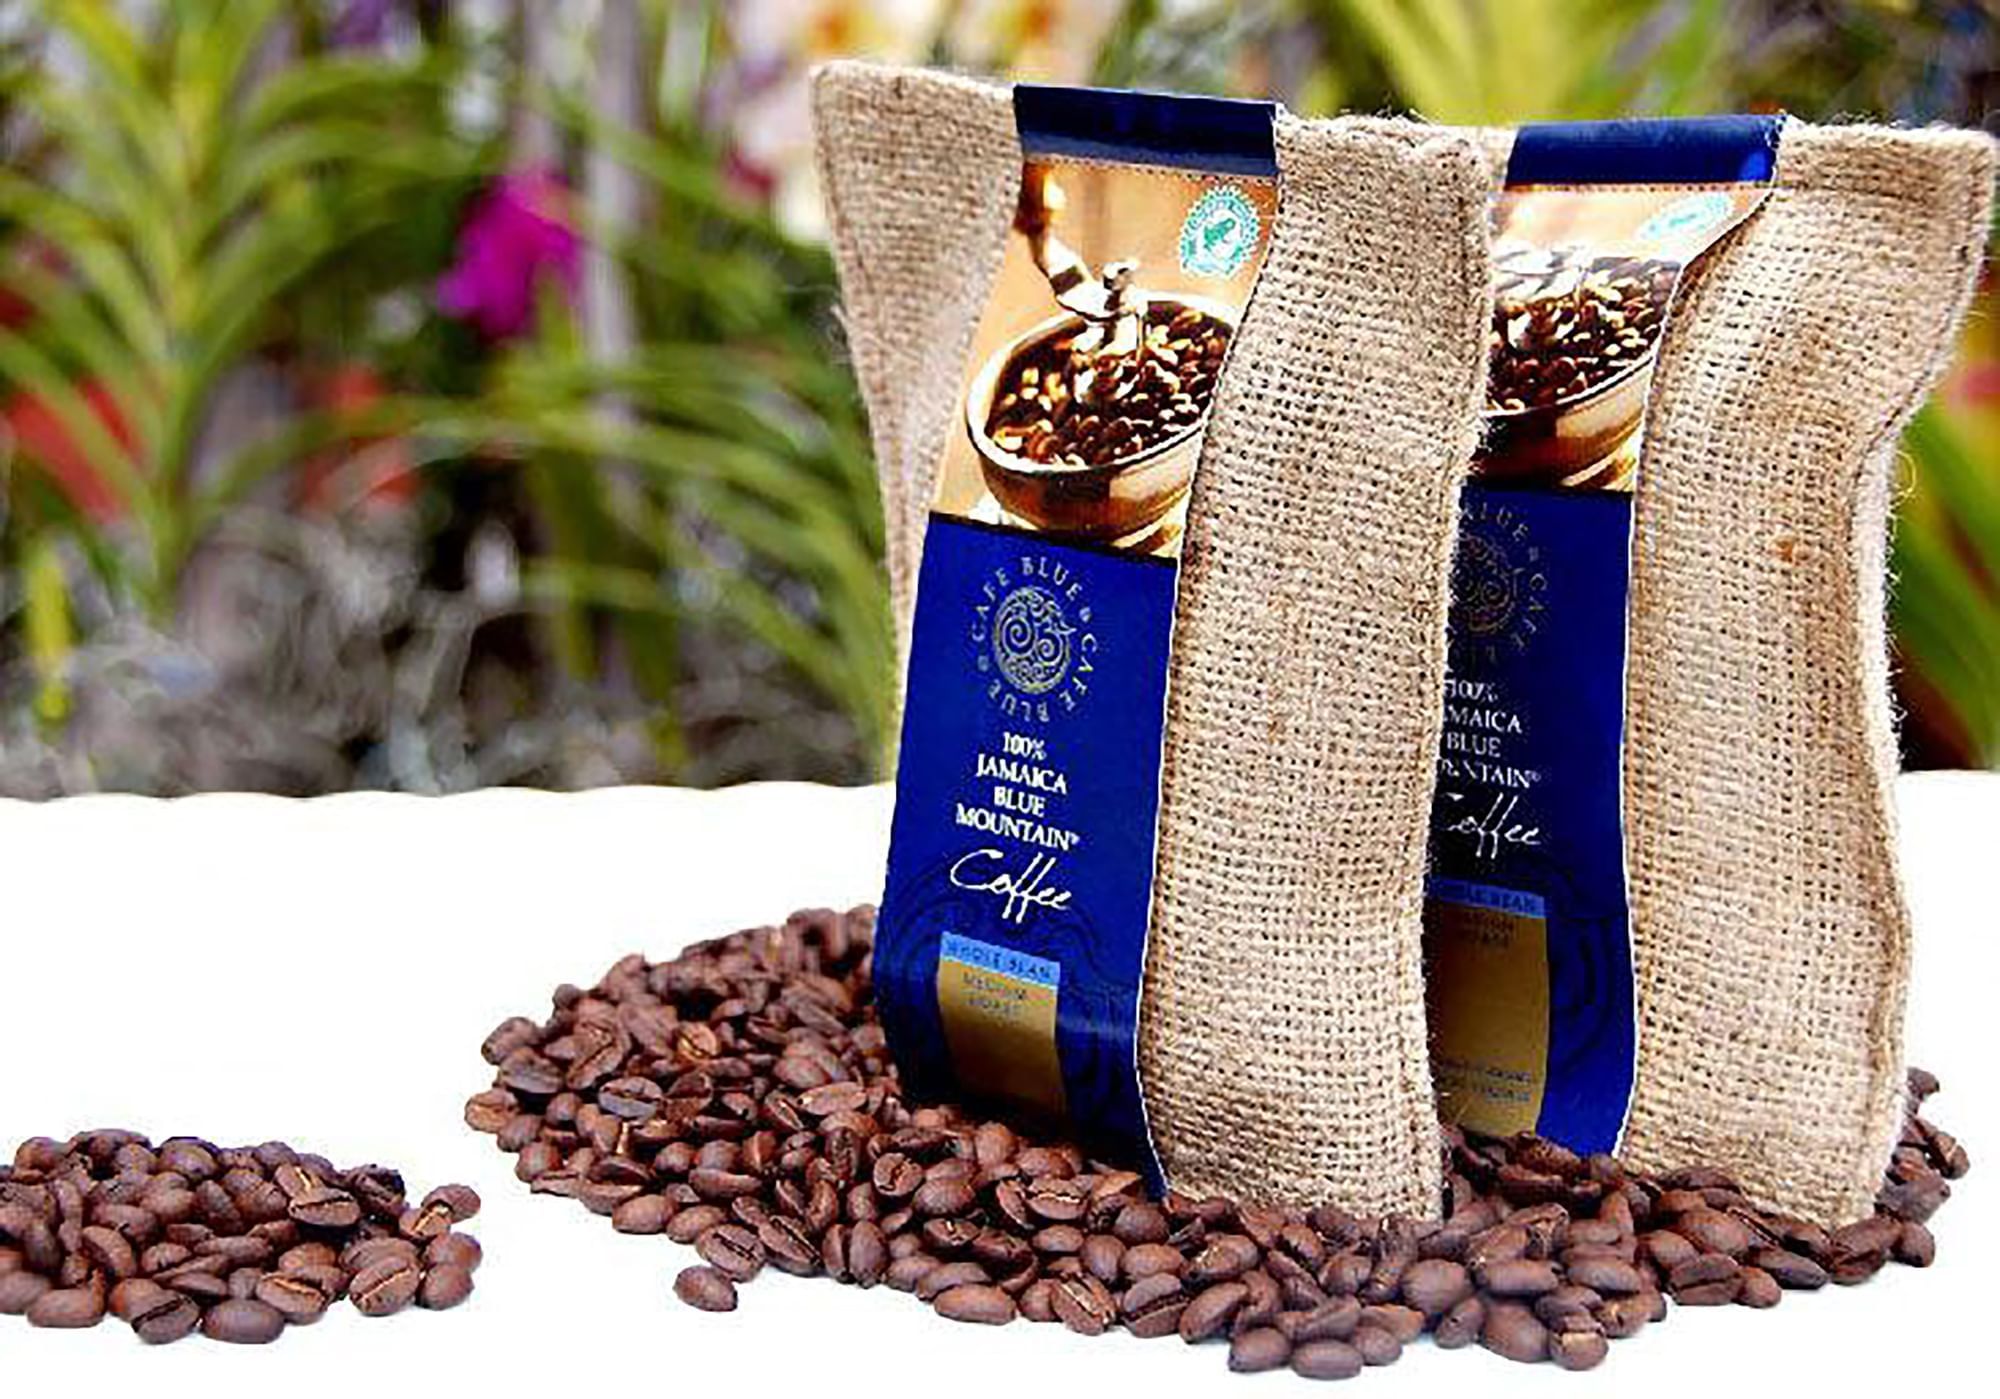 Portrait of a Jamaican Blue Mountain Coffee packet at Courtleigh Hotel and Suites